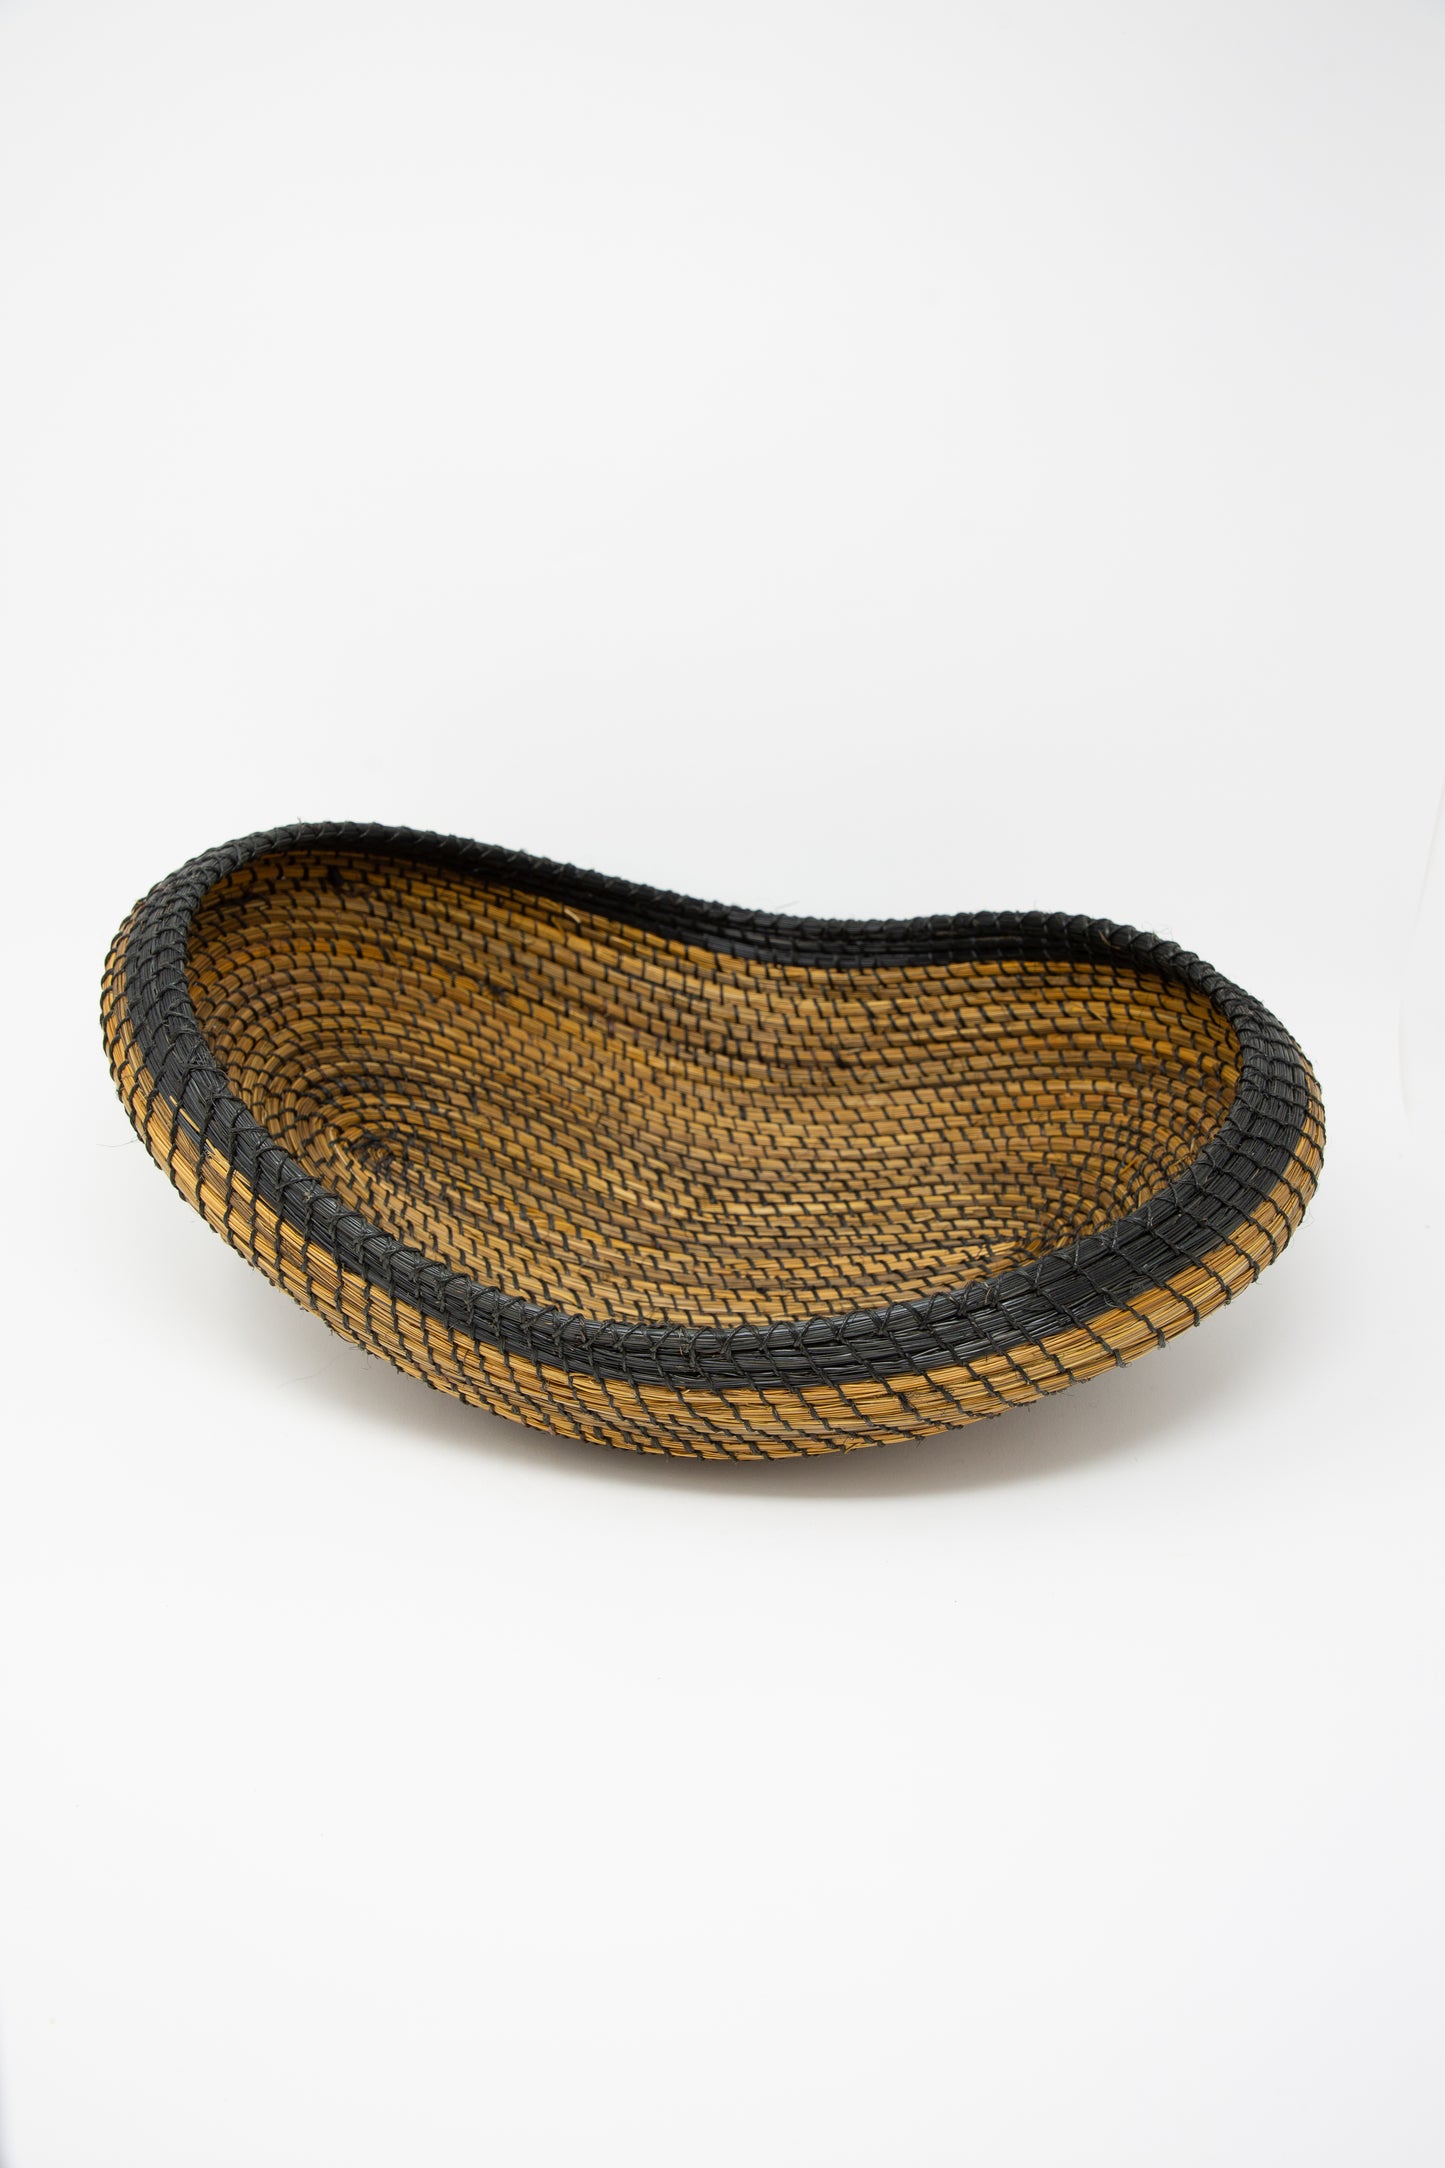 A black and brown Asopafit Canoe Basket, showcasing traditional weaving skills from Colombia by Plaza Bolivar, set against a fresh white background.